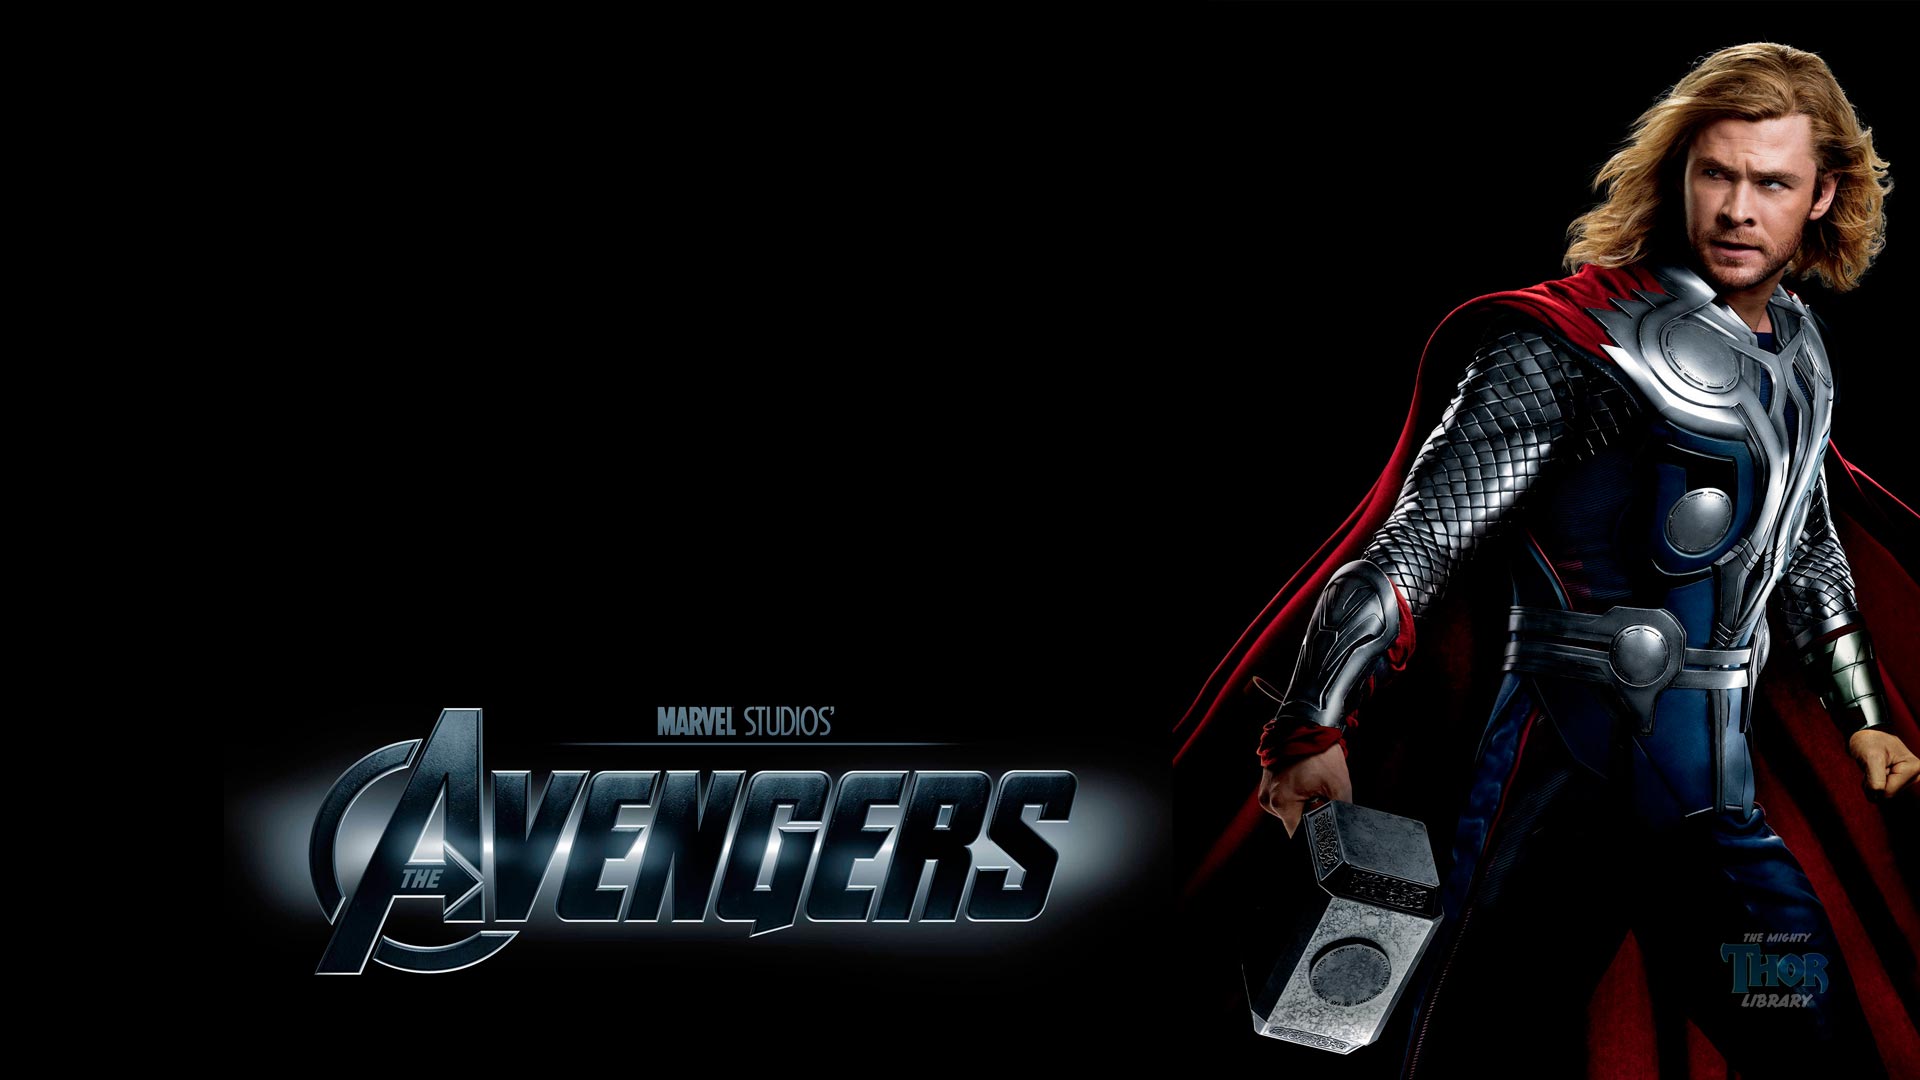 Thor Wallpapers Image Gallery   HD wallpapers 1080p 1920x1080